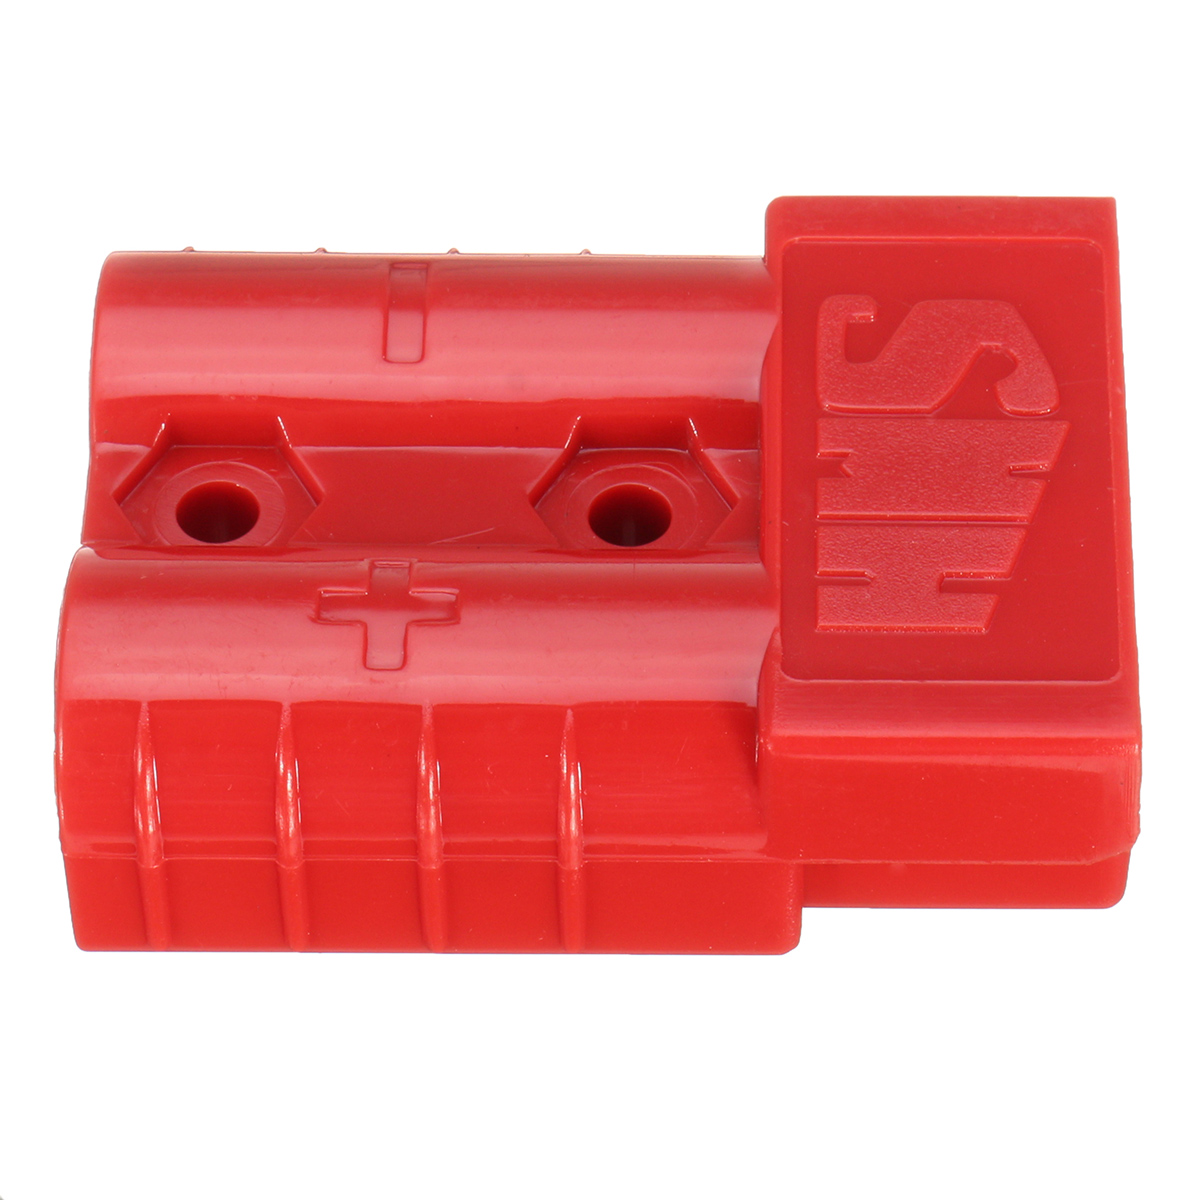 Excellway-50A-8AWG-Battery-Quick-Connector-Plug-Connect-Terminal-Disconnect-Winch-Trailer-Red-1170740-9